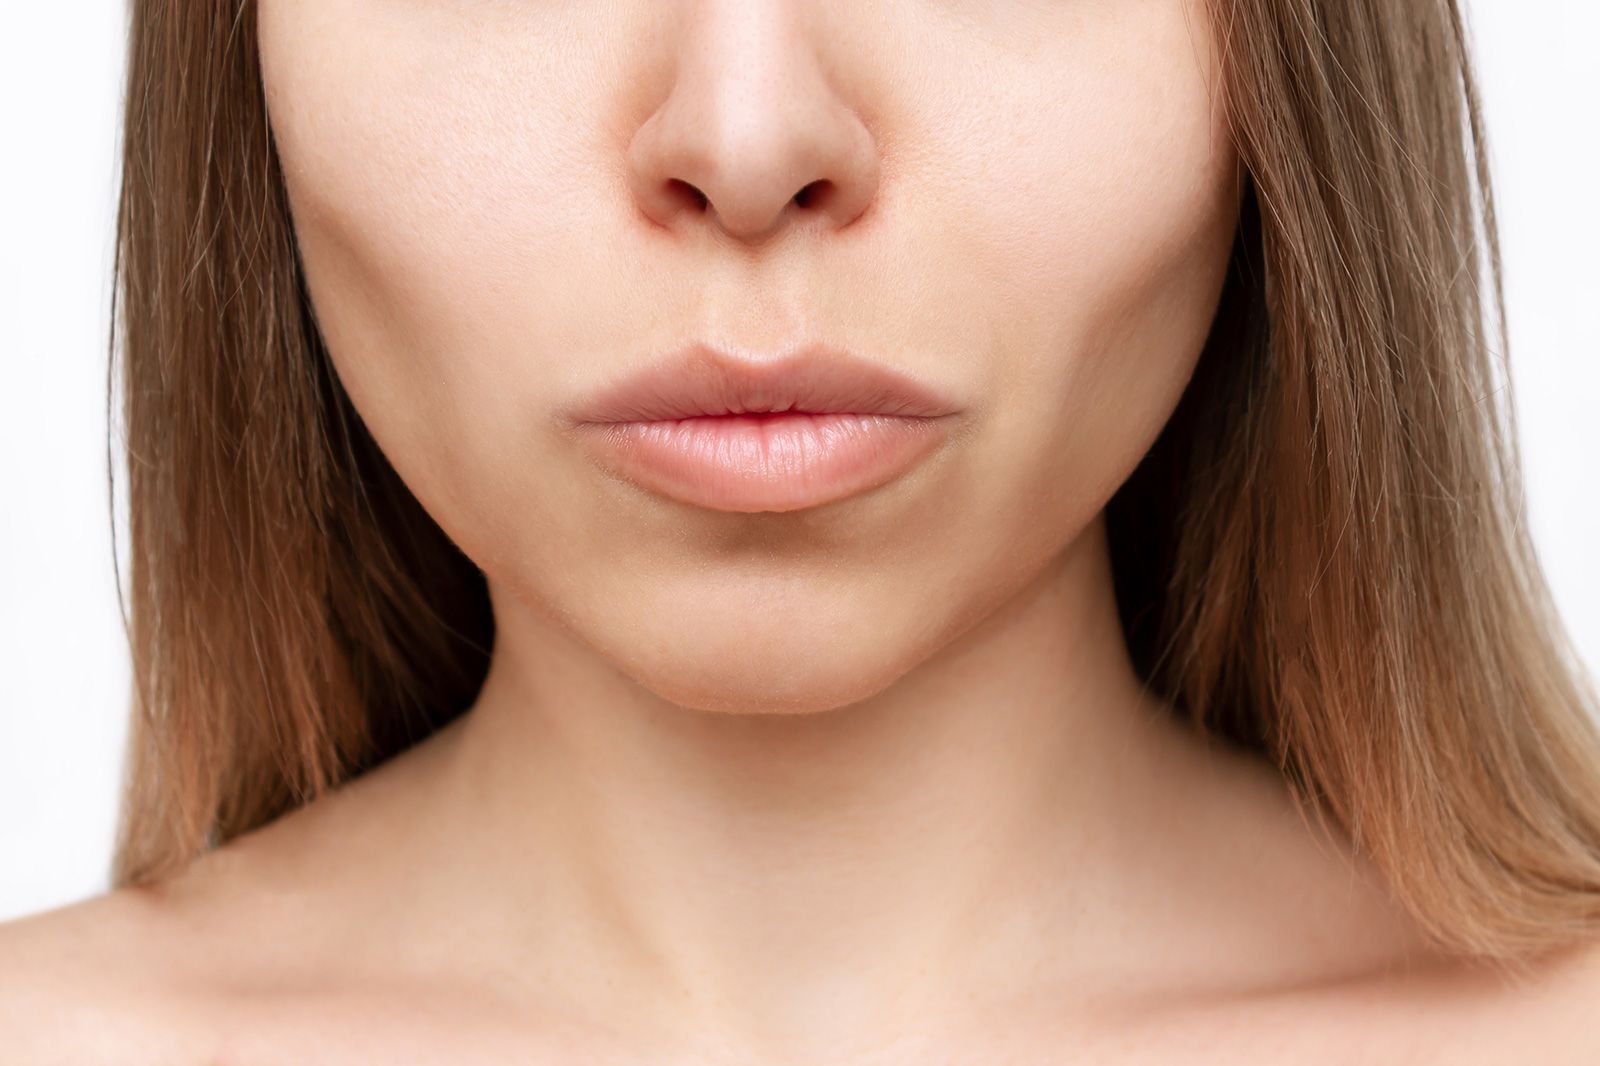 Why everyone is suddenly talking about buccal fat removal